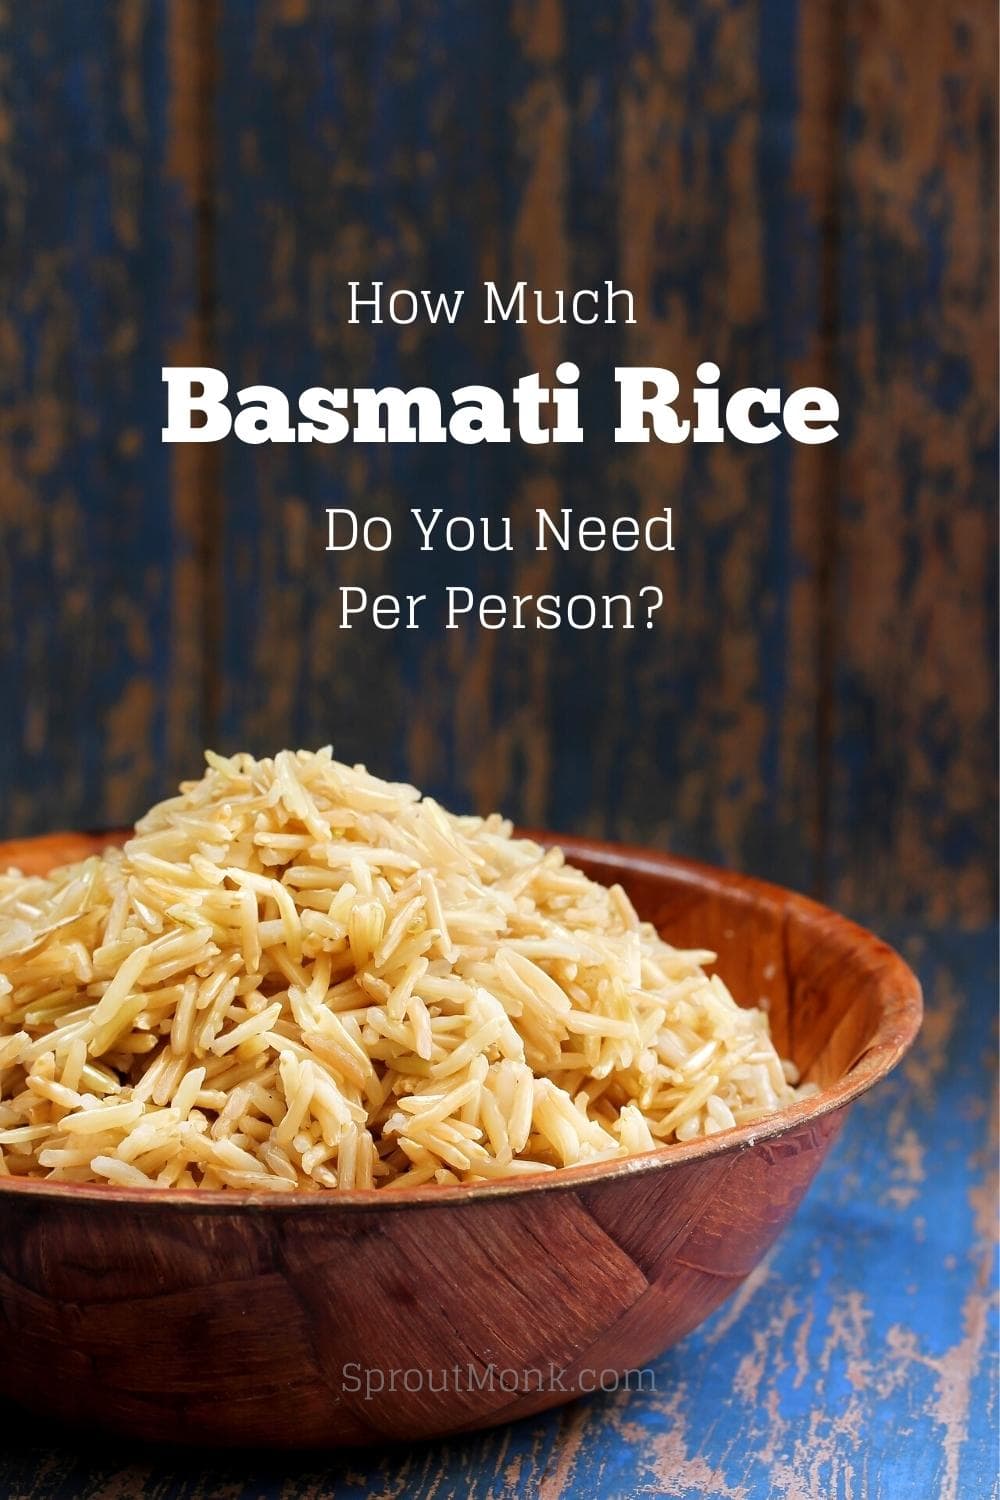 how much basmati rice per person guide cover image